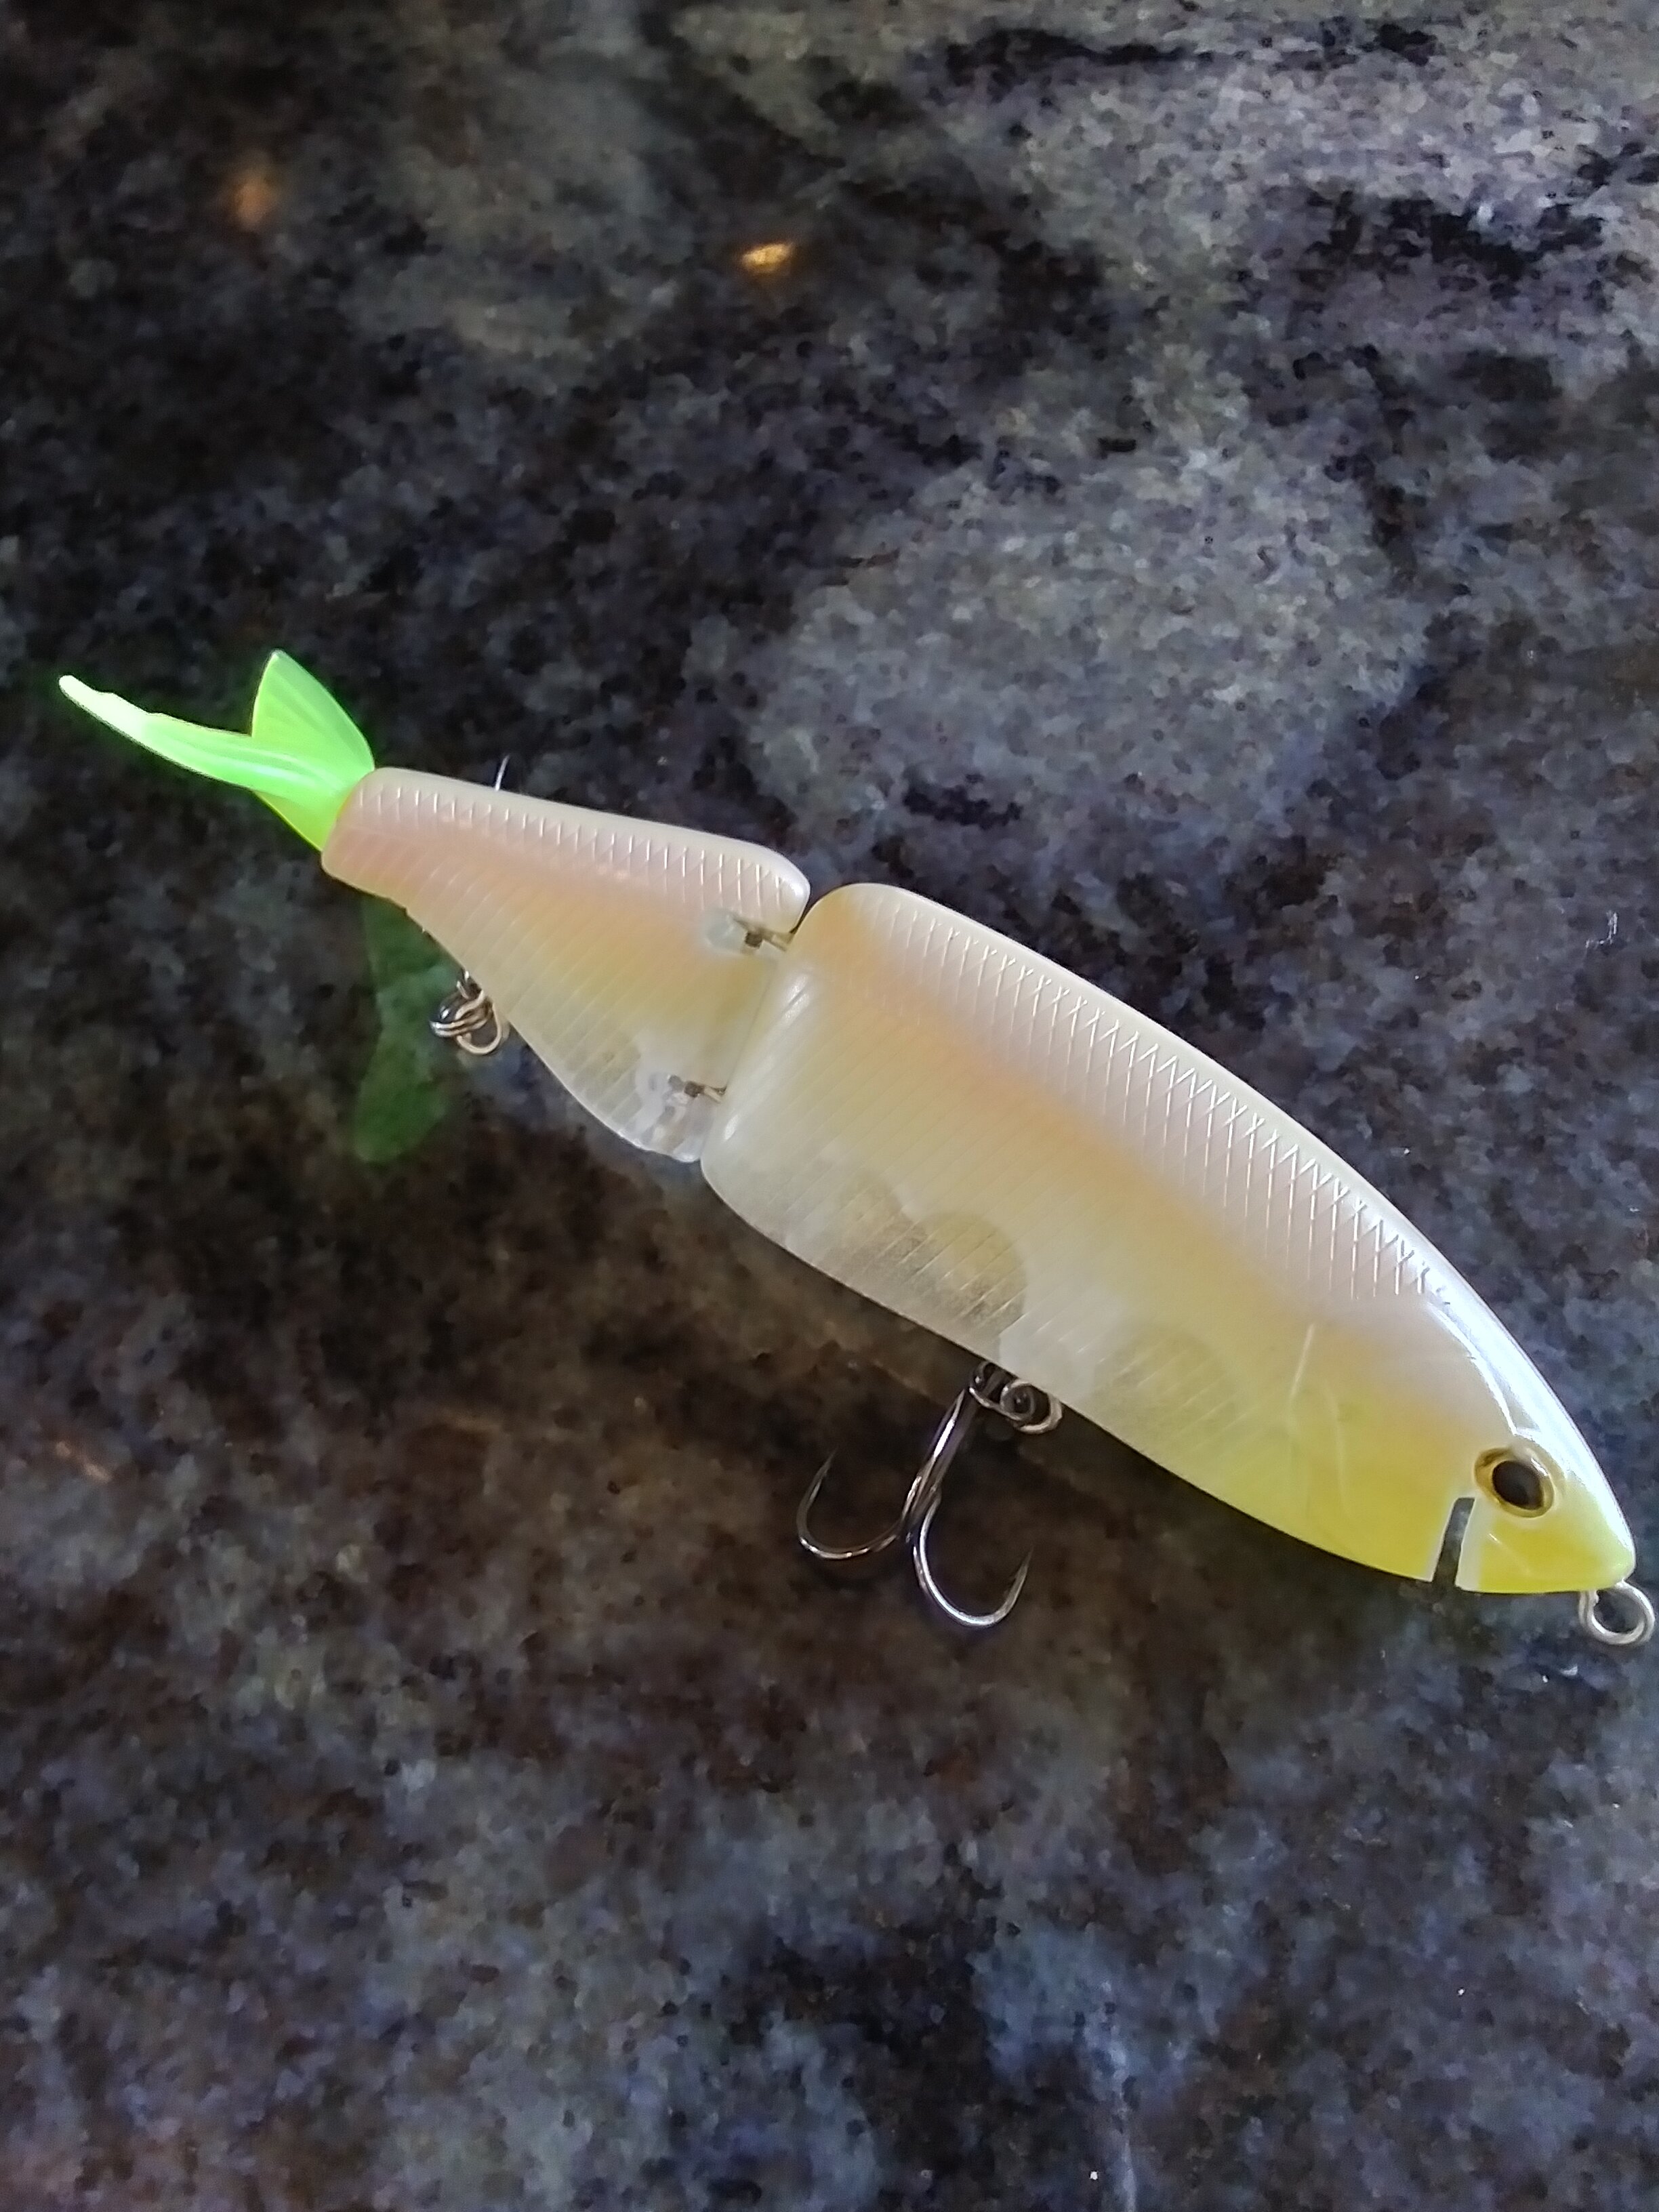 LOZ Glide Bait'n with the new HYPER SHAD in 47-48 degree water temps!!  4/9/22 